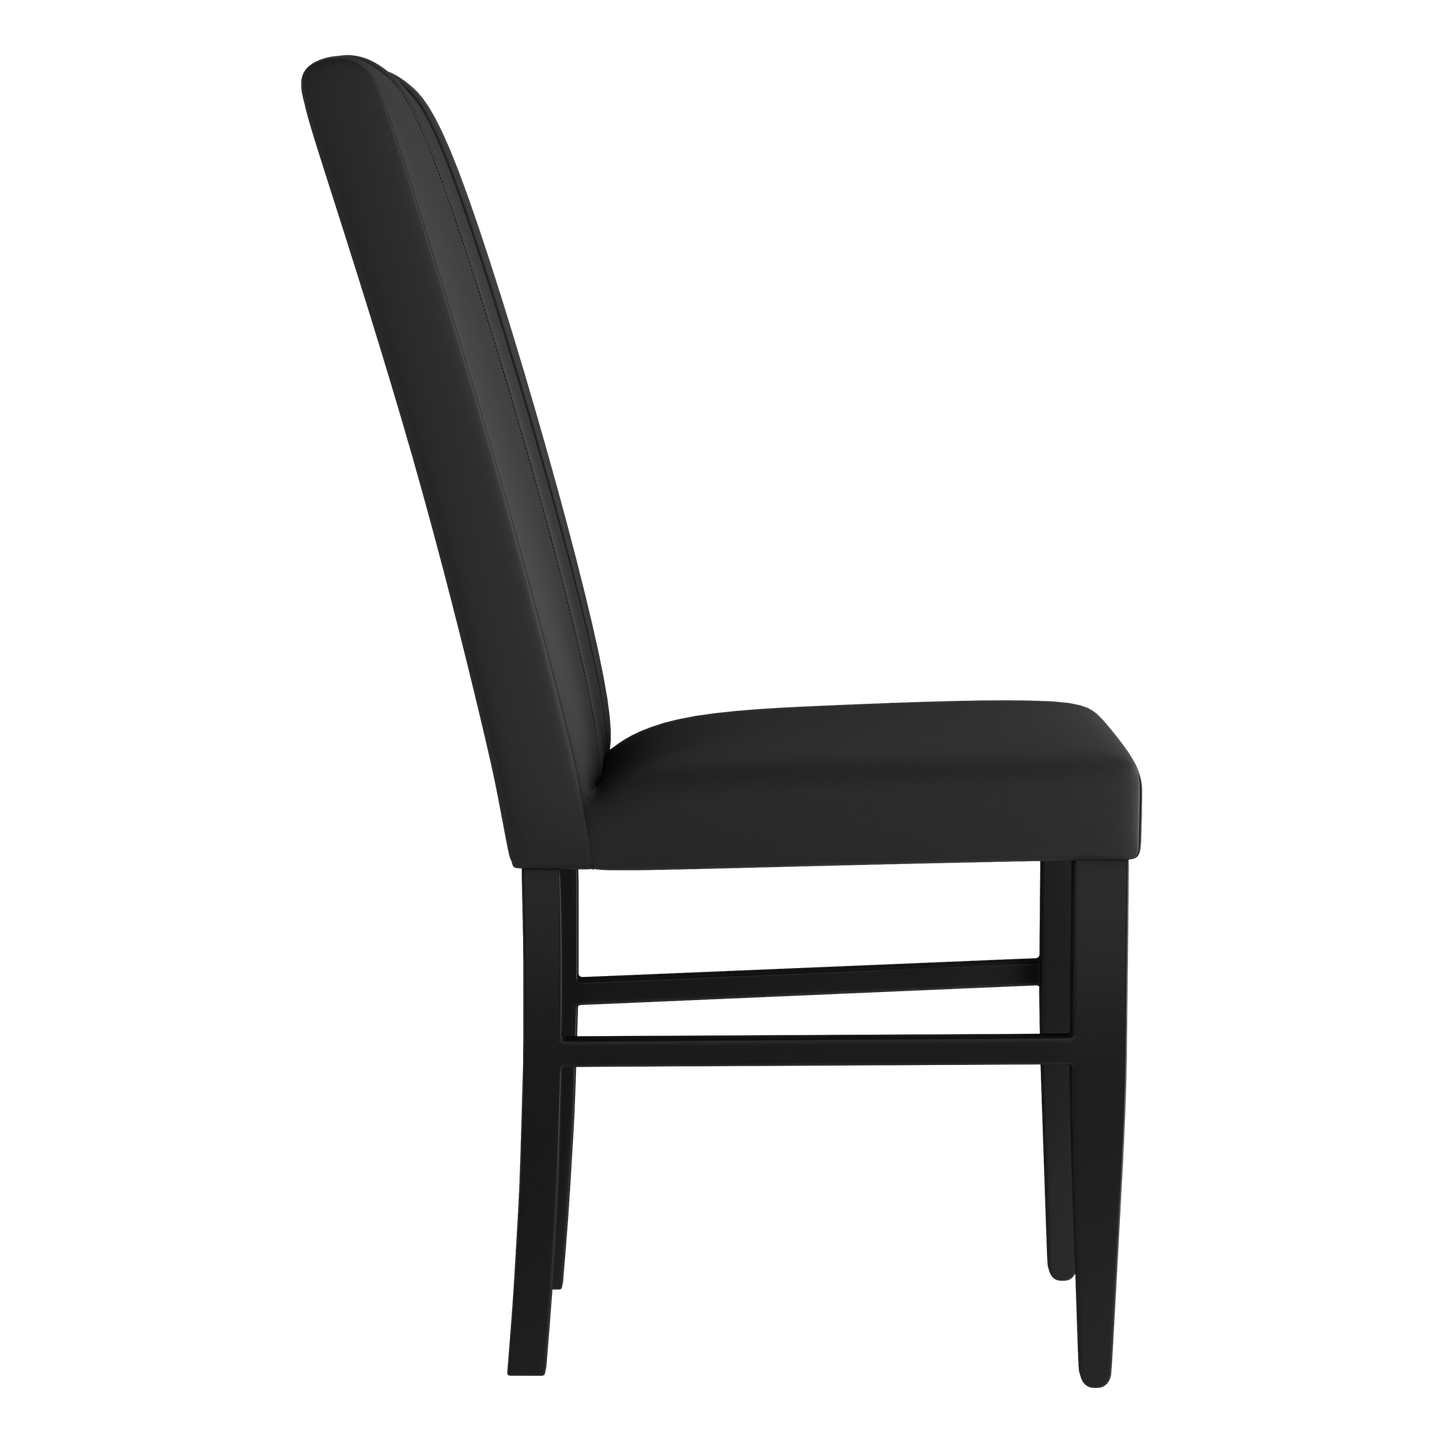 Side Chair 2000 with American East Esports Conference Logo Set of 2